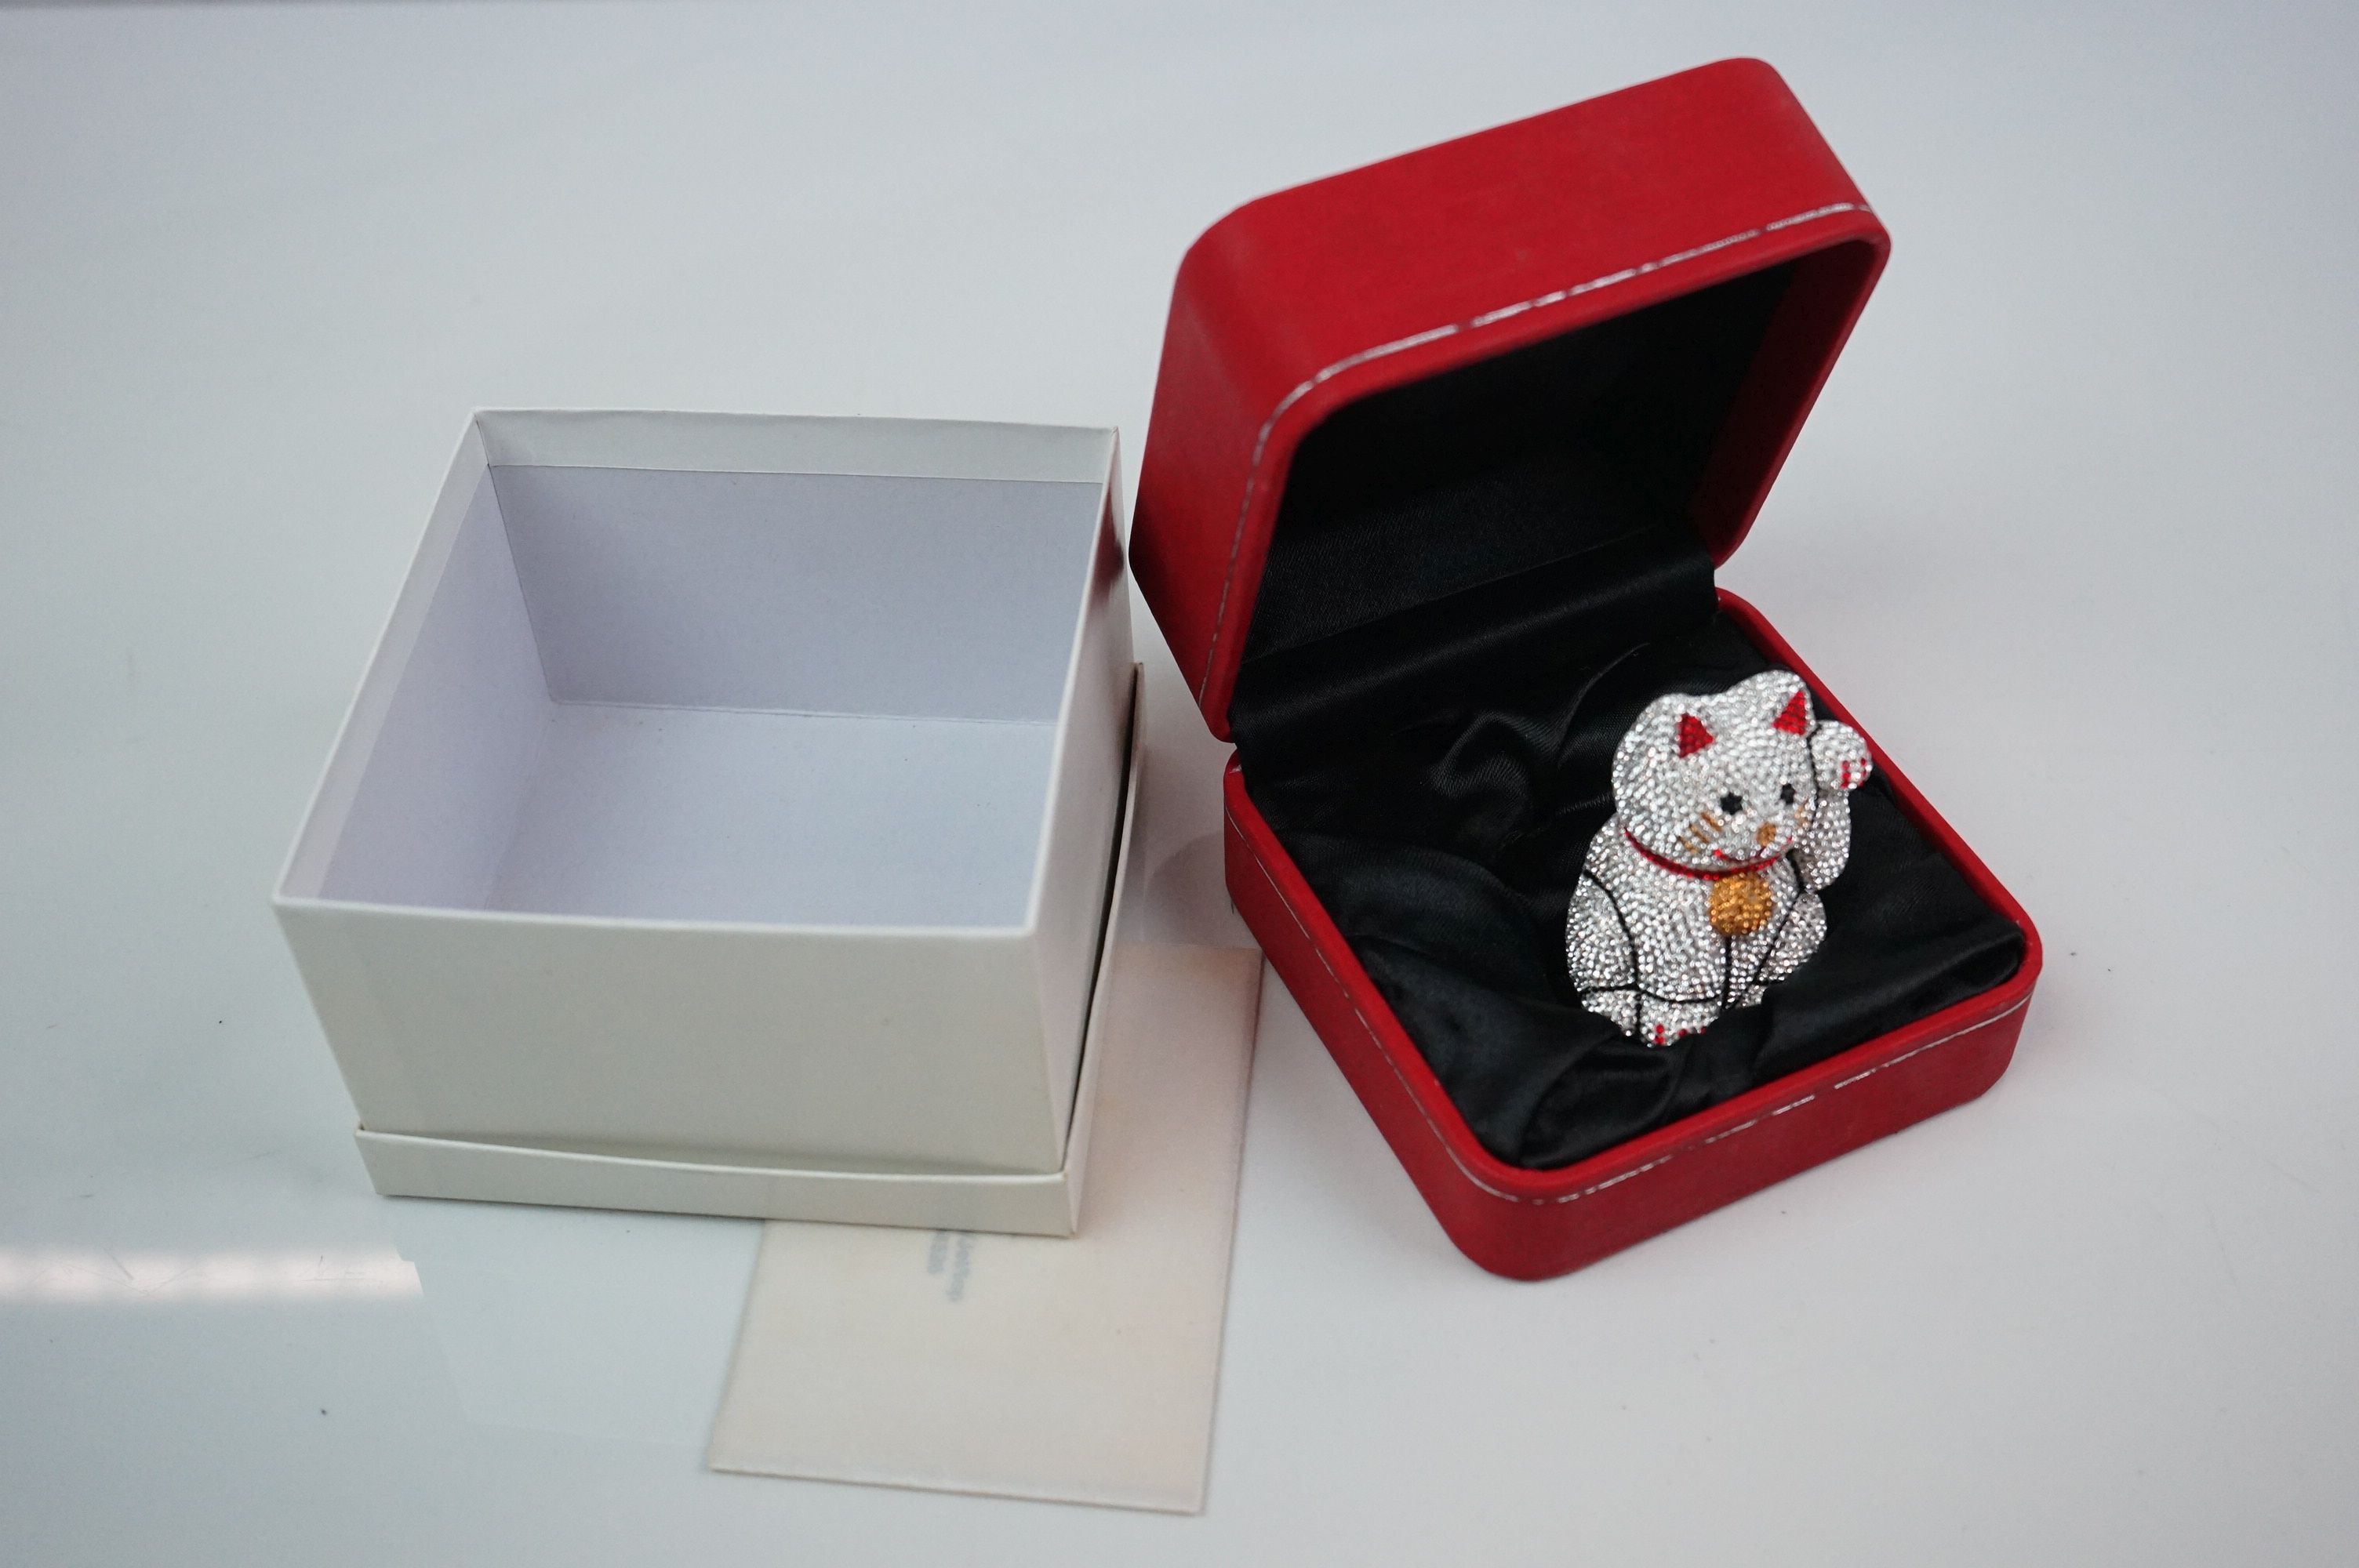 Boxed Swarovski Art Edition Crystal Encrusted ' Lucky Cat ' Ornament, with certificate